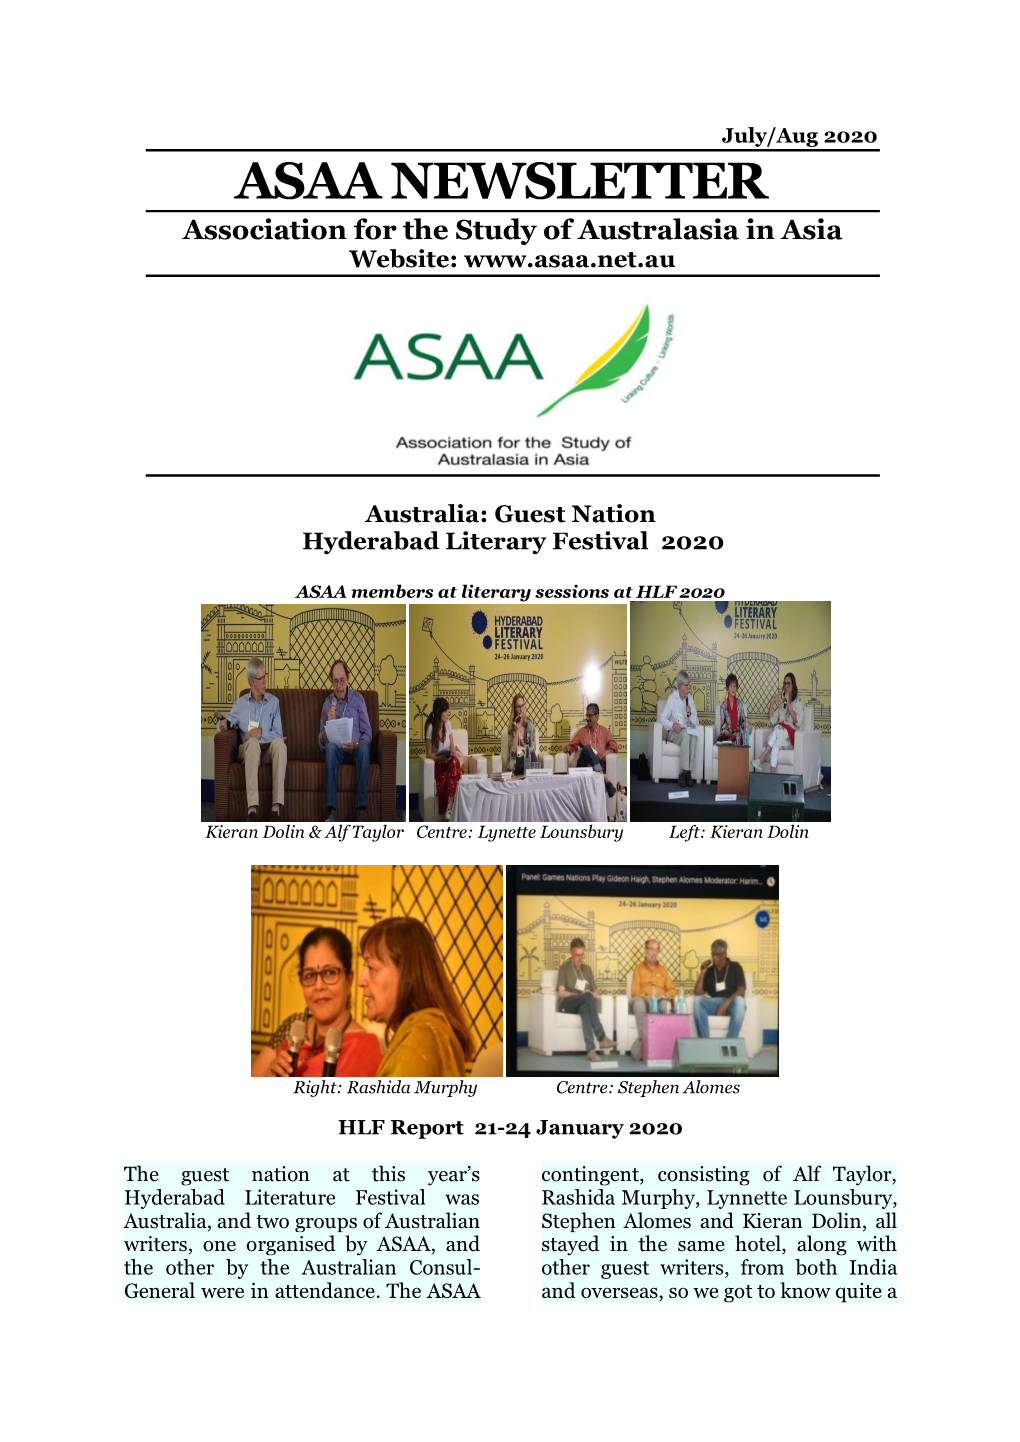 ASAA NEWSLETTER Association for the Study of Australasia in Asia Website